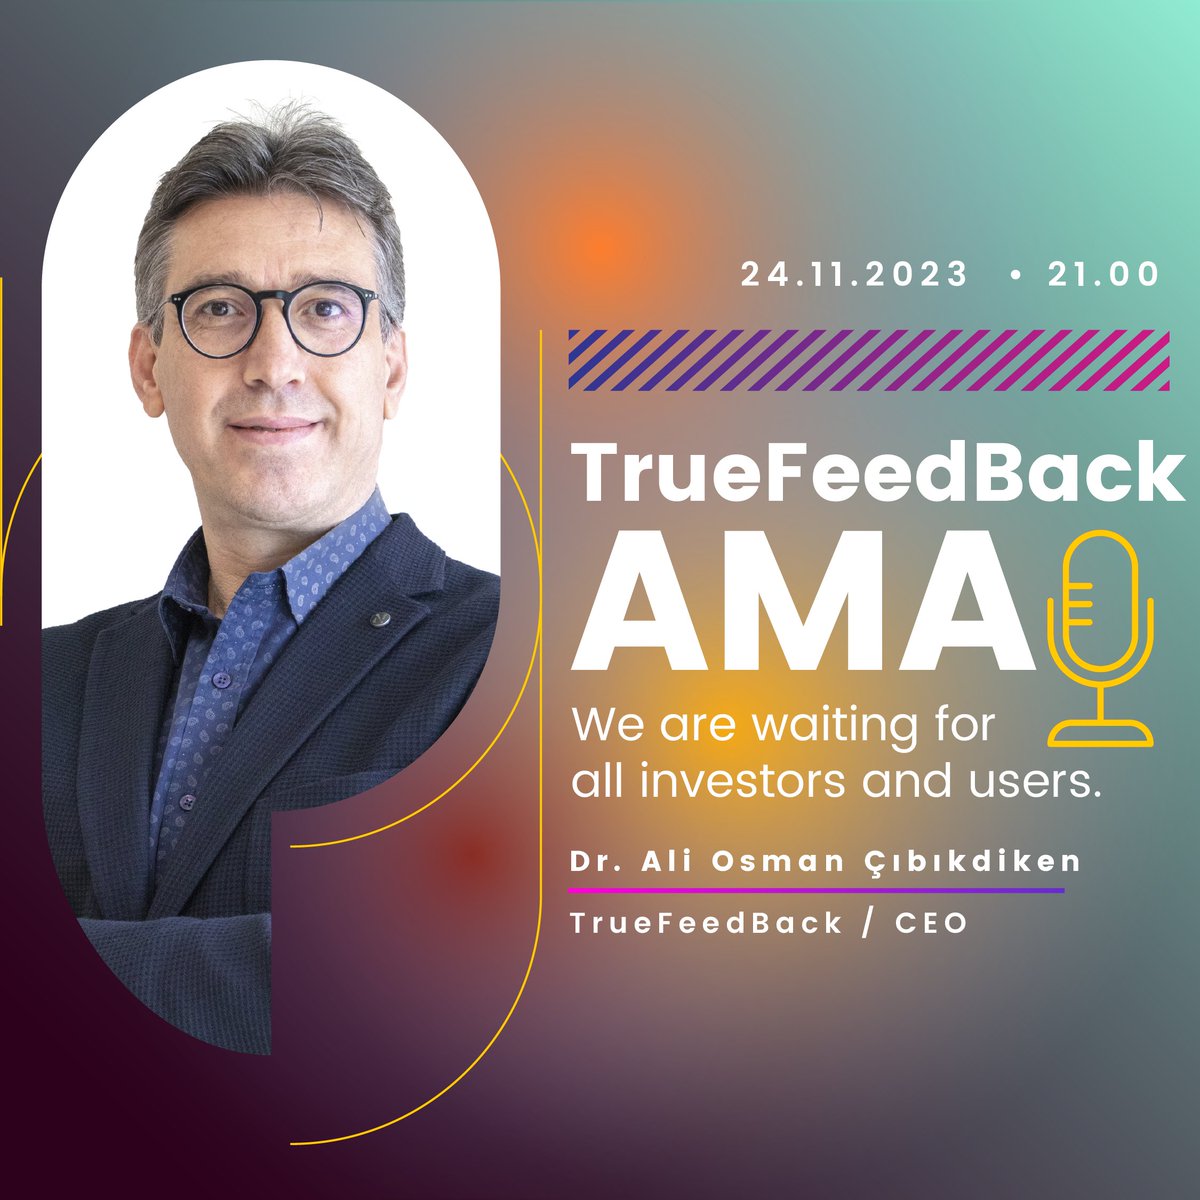 We're together at the TrueFeedBack AMA this Friday! We invite all our investors and users to our event. Date: 24.11.2023 Time: 21.00 Location: 'TrueFeedBack Türkiye' Telegram Channel Access Link: t.me/Tfbturkey #TrueFeedBack #NewBlackStar #Blockchain #SocialFi #AMA